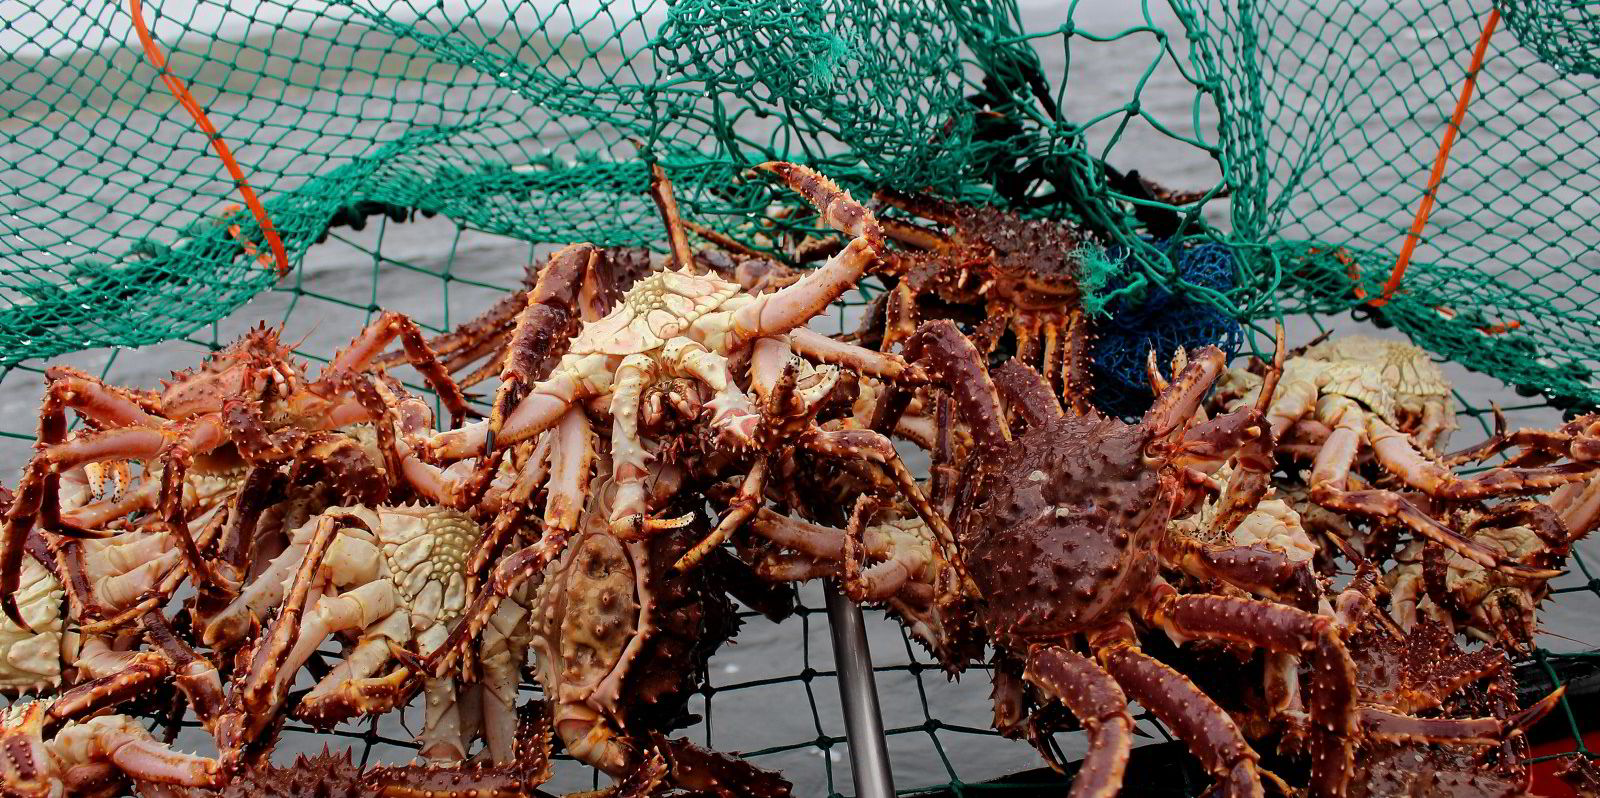 More Russian king, snow crab fisheries secure Marine Stewardship